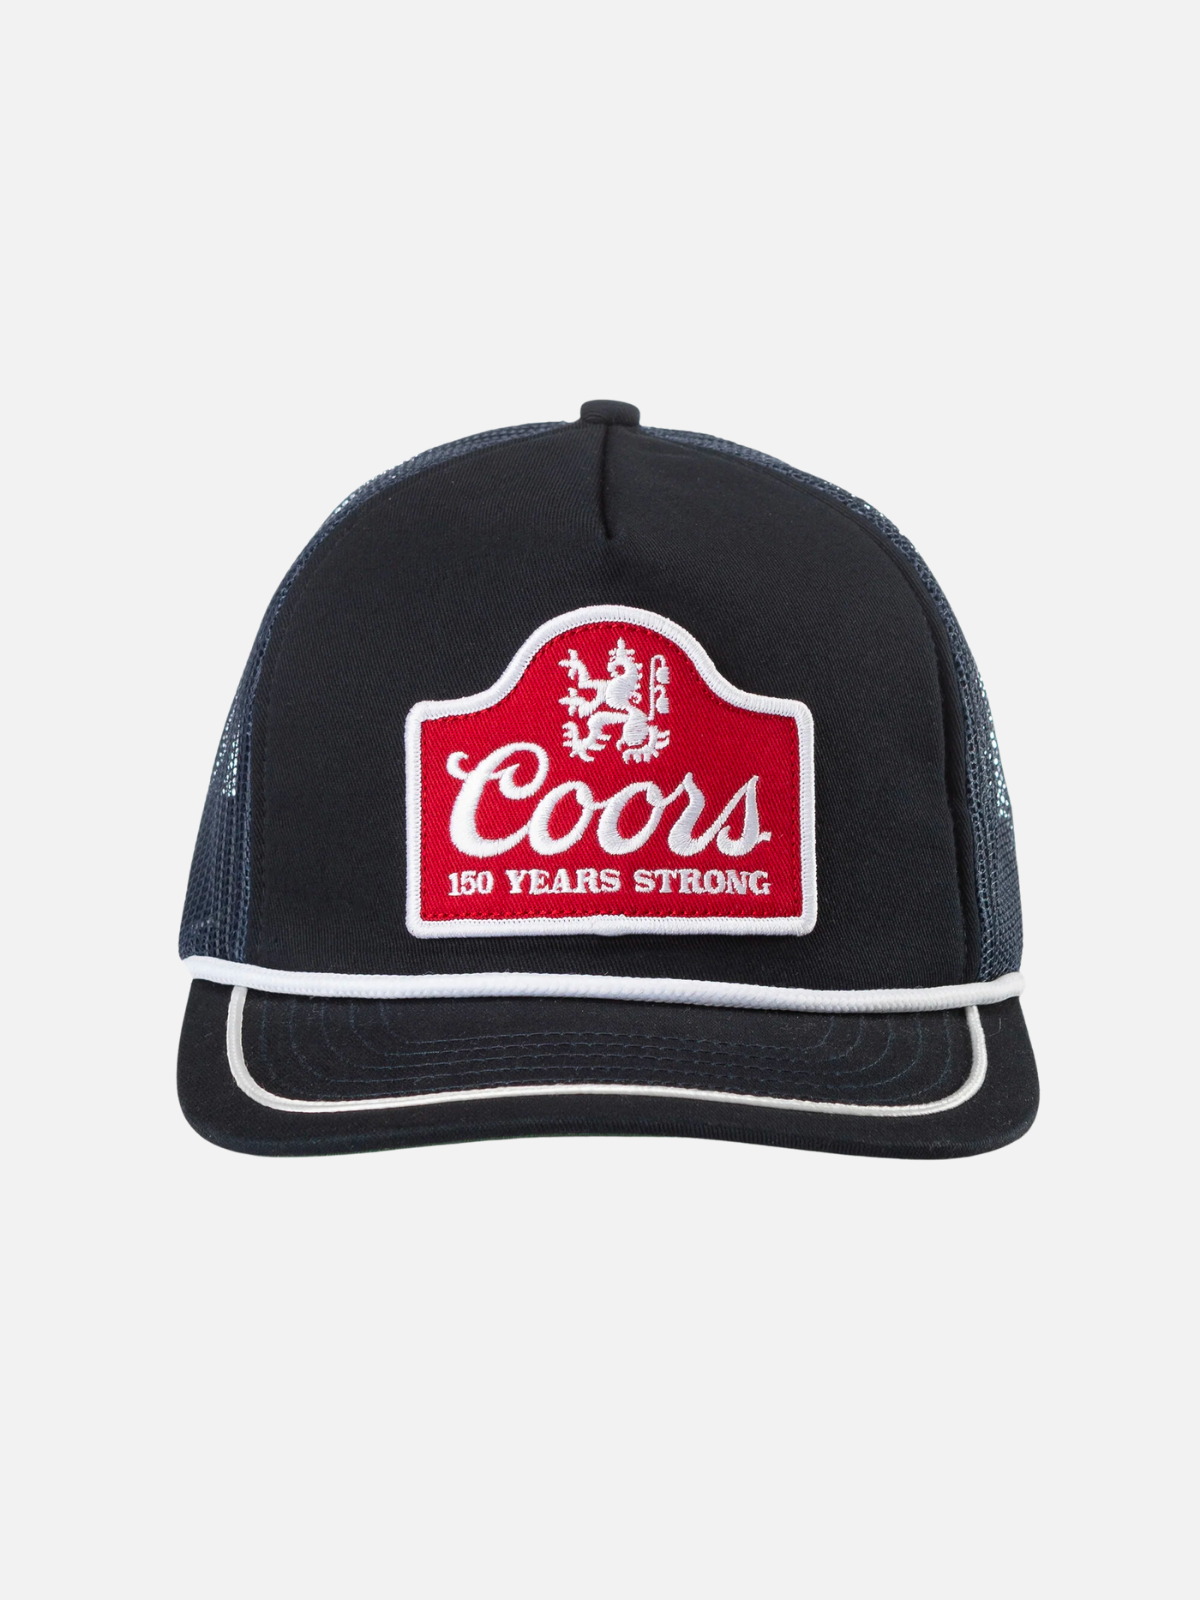 seager coors banquet collaboration celebrating 150 years hat snapback trucker hat navy blue white red cotton canvas polyester mesh kempt athens ga georgia men's clothing store